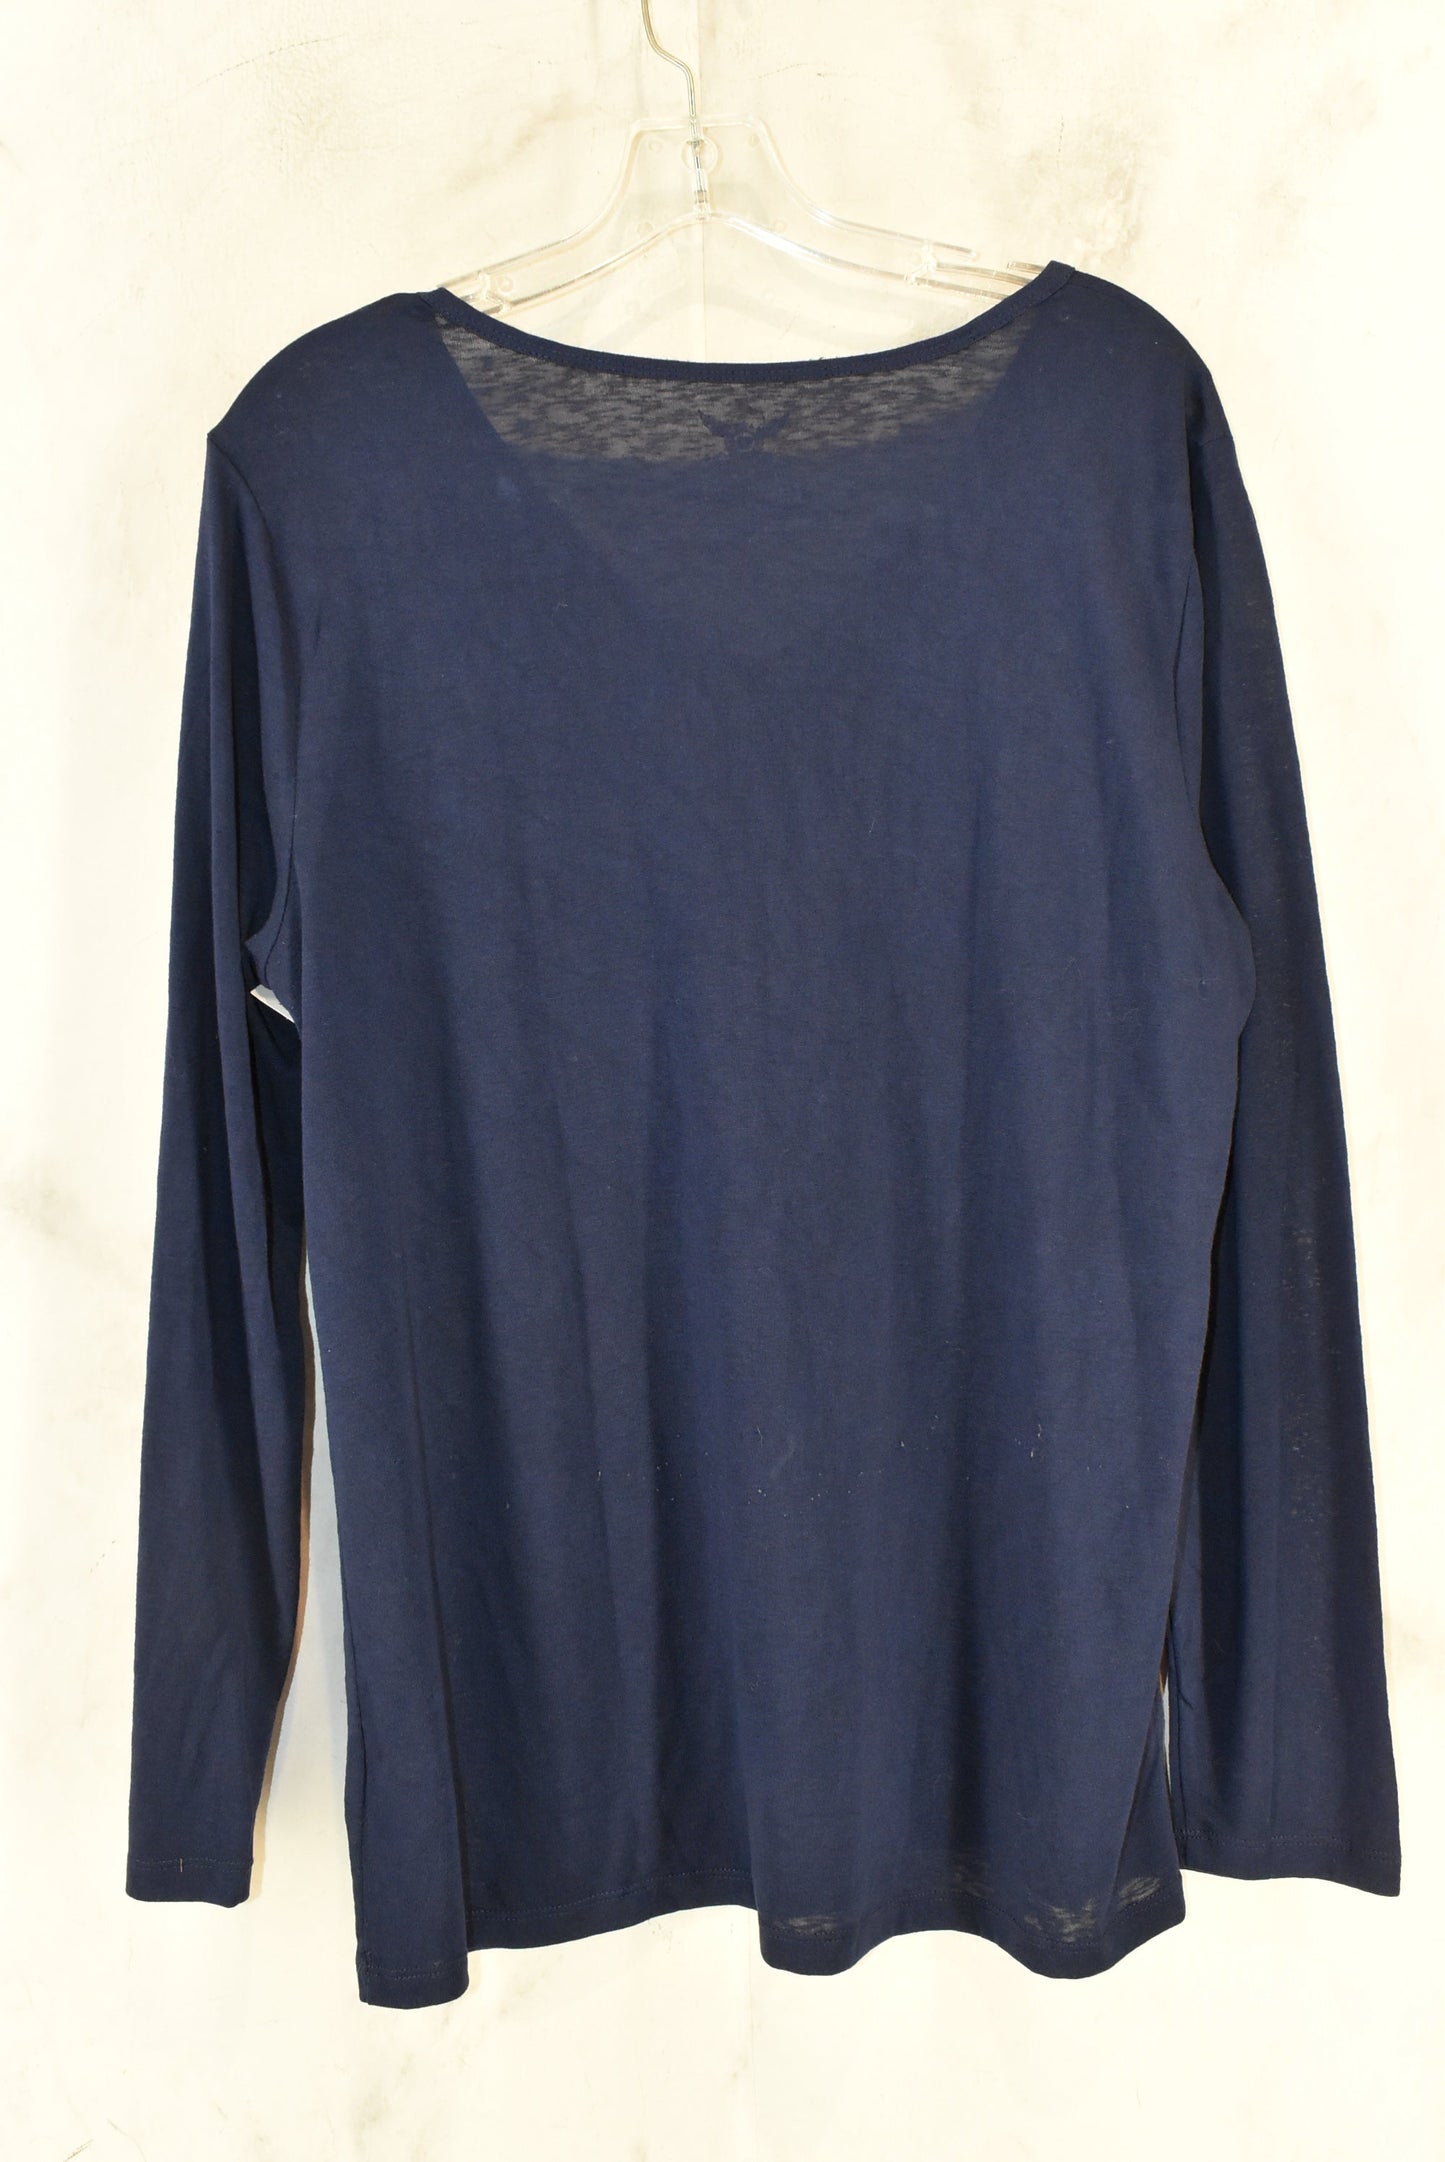 Top Long Sleeve Basic By Faded Glory  Size: 2x